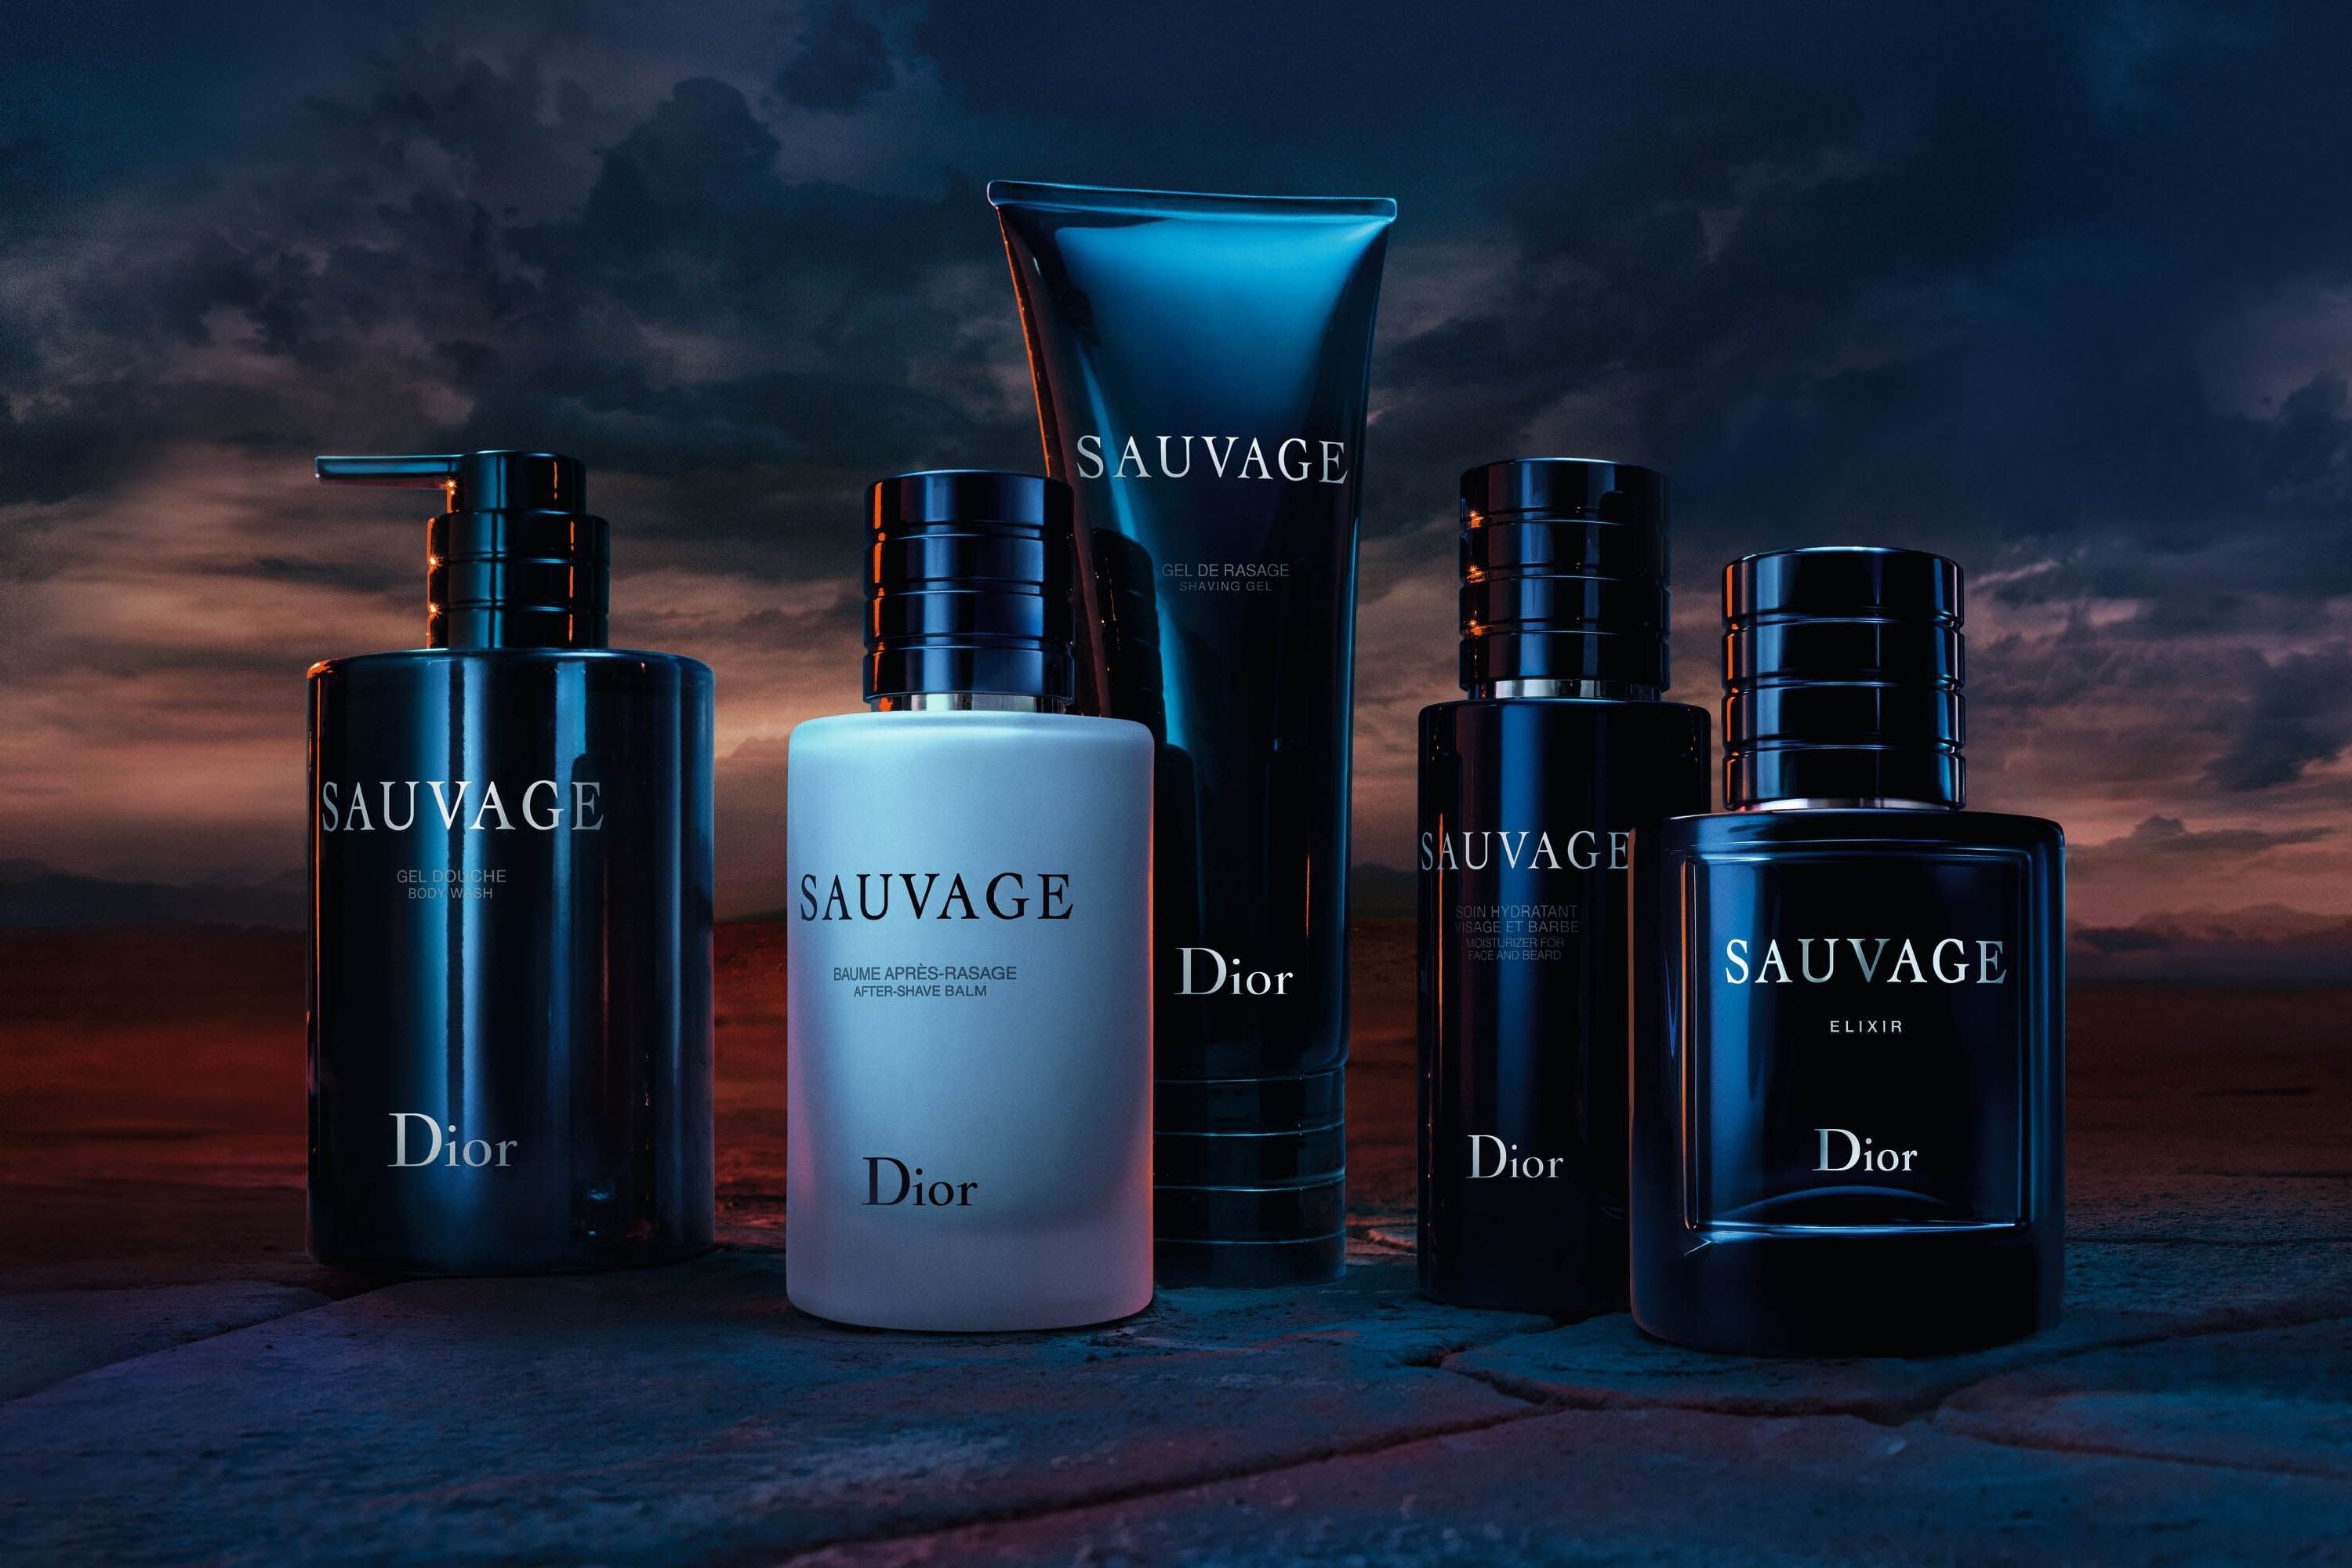 Dior Sauvage Review: Is It Worth It? - My Perfume Shop